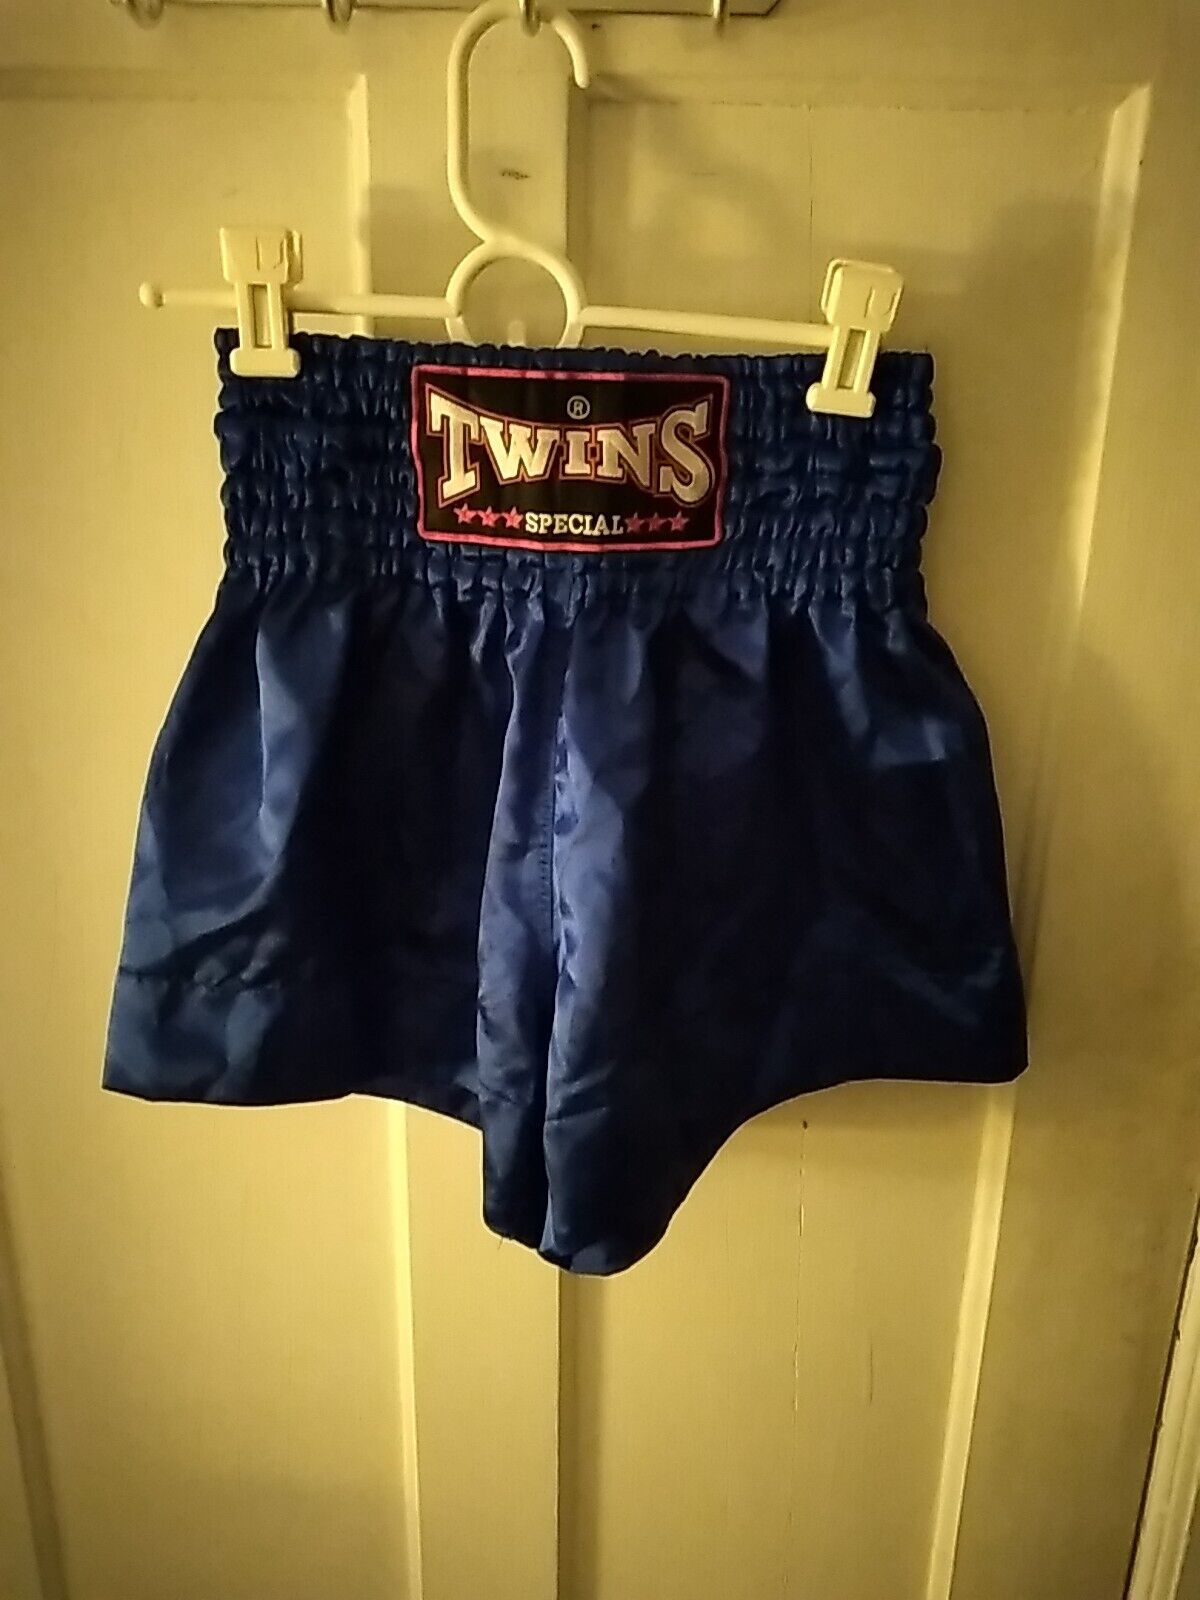 Twins Special Size S Blue Boxing Shorts - Brand New